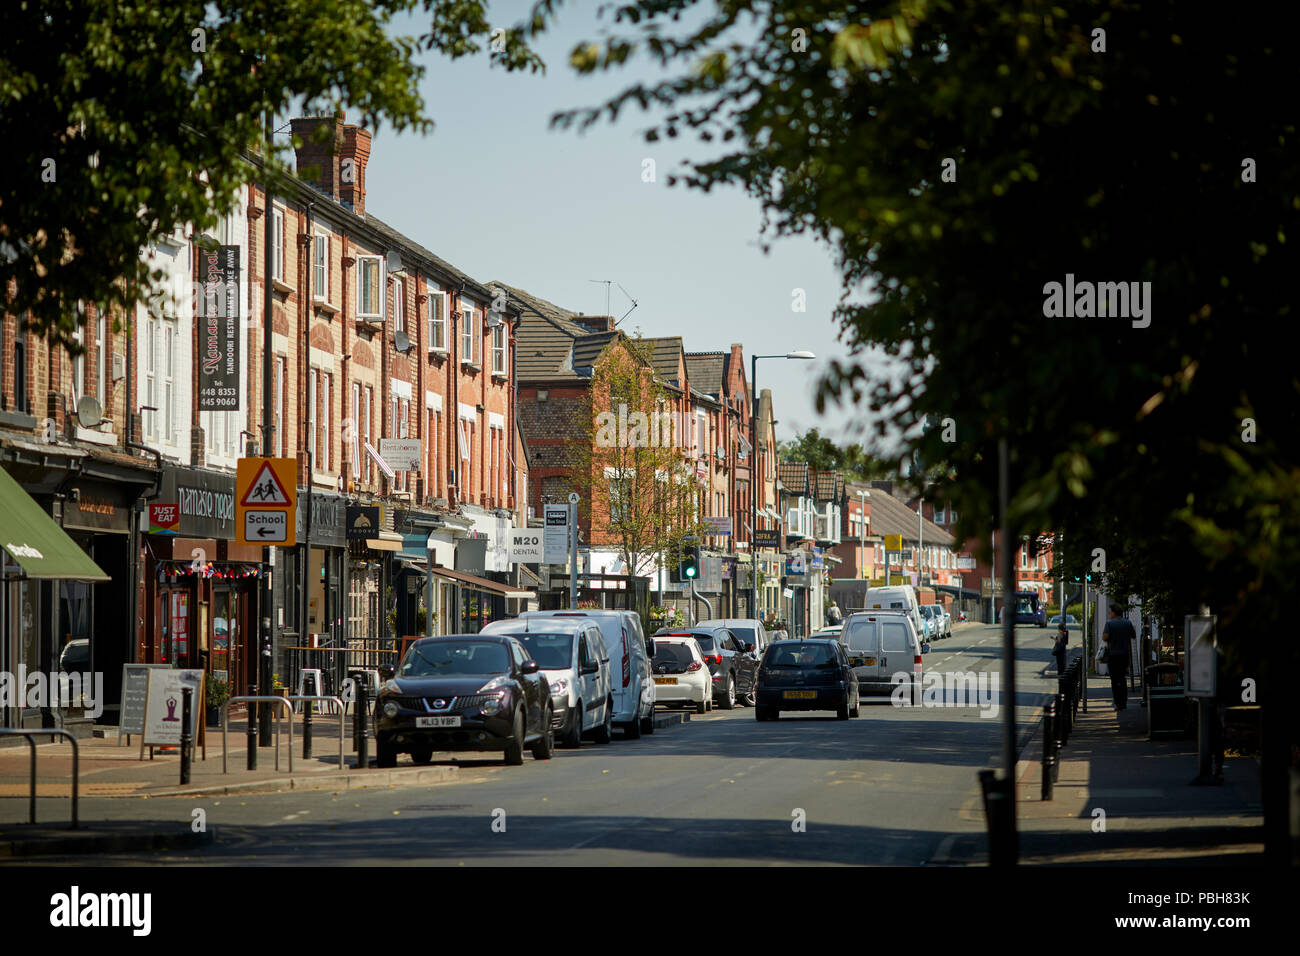 Burton Road High Resolution Stock Photography and Images - Alamy